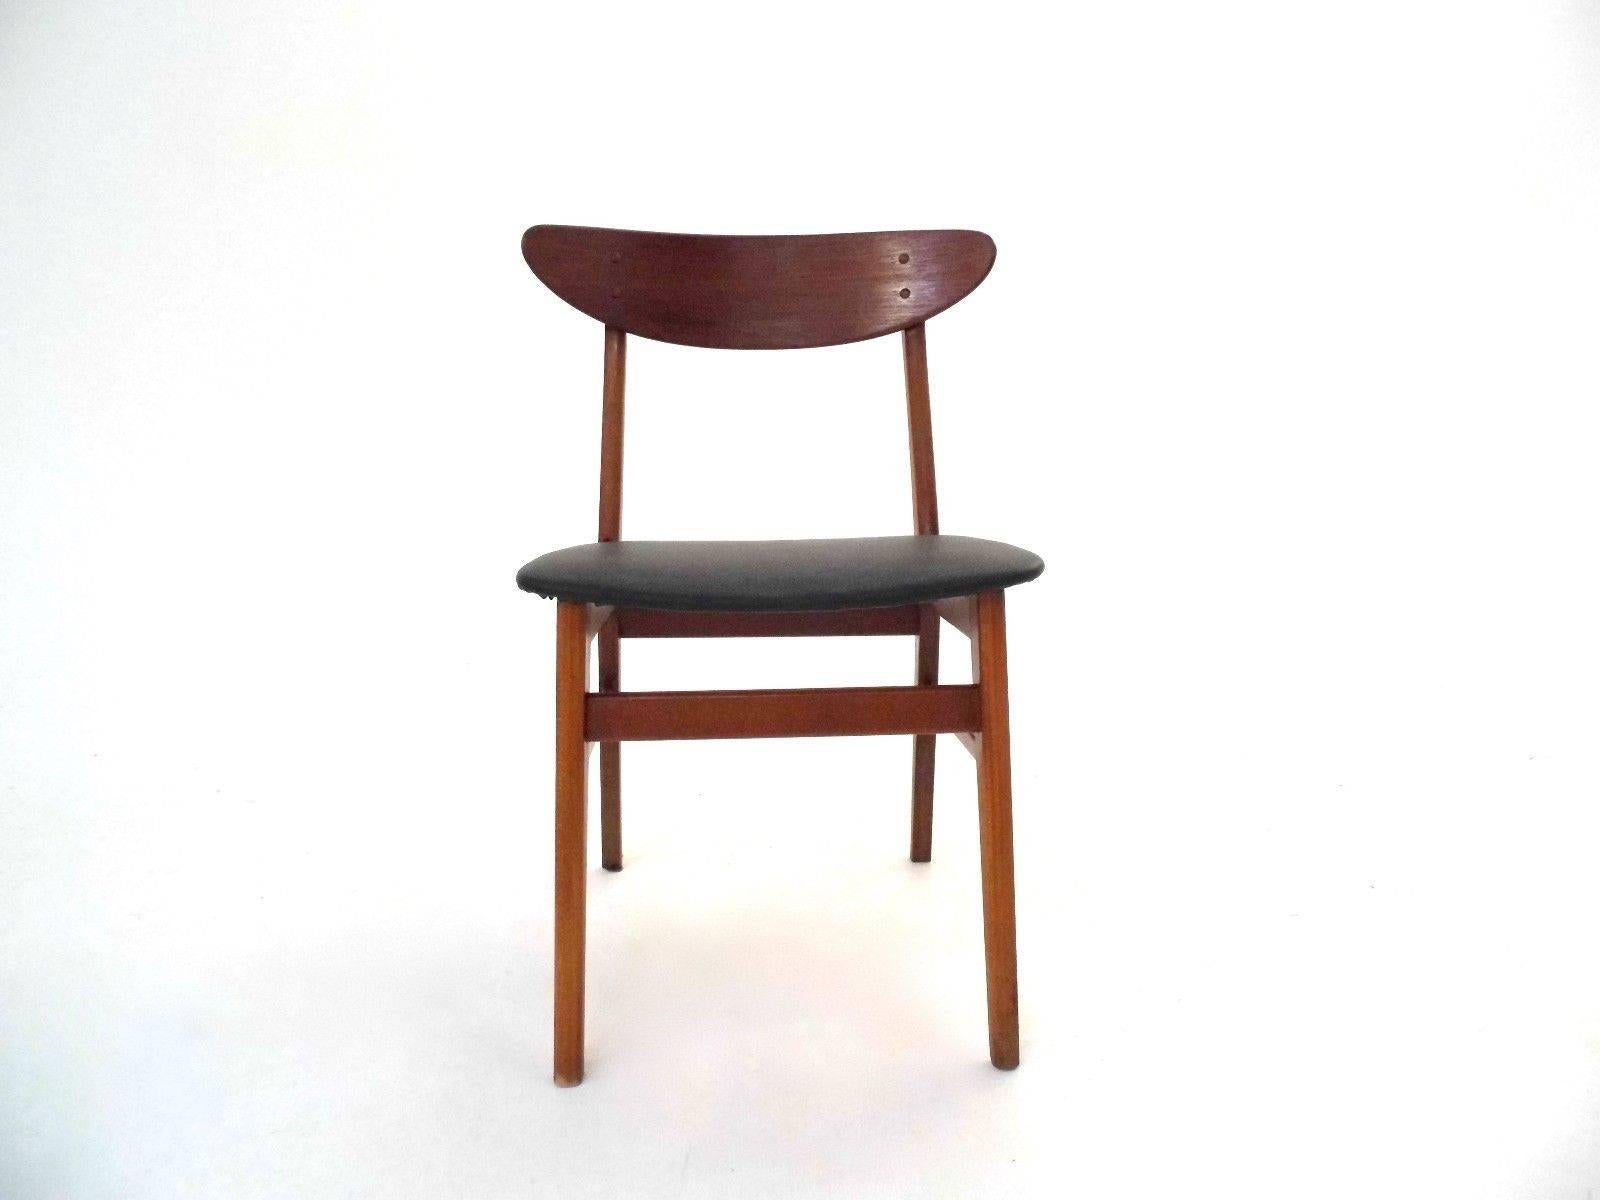 A beautiful set of four Danish Model 210 teak and black vinyl dining chairs by Farstrup, these would make a stylish addition to any dining area. The chairs have wide seat pads and sculptured teak back rests. A striking piece of classically designed